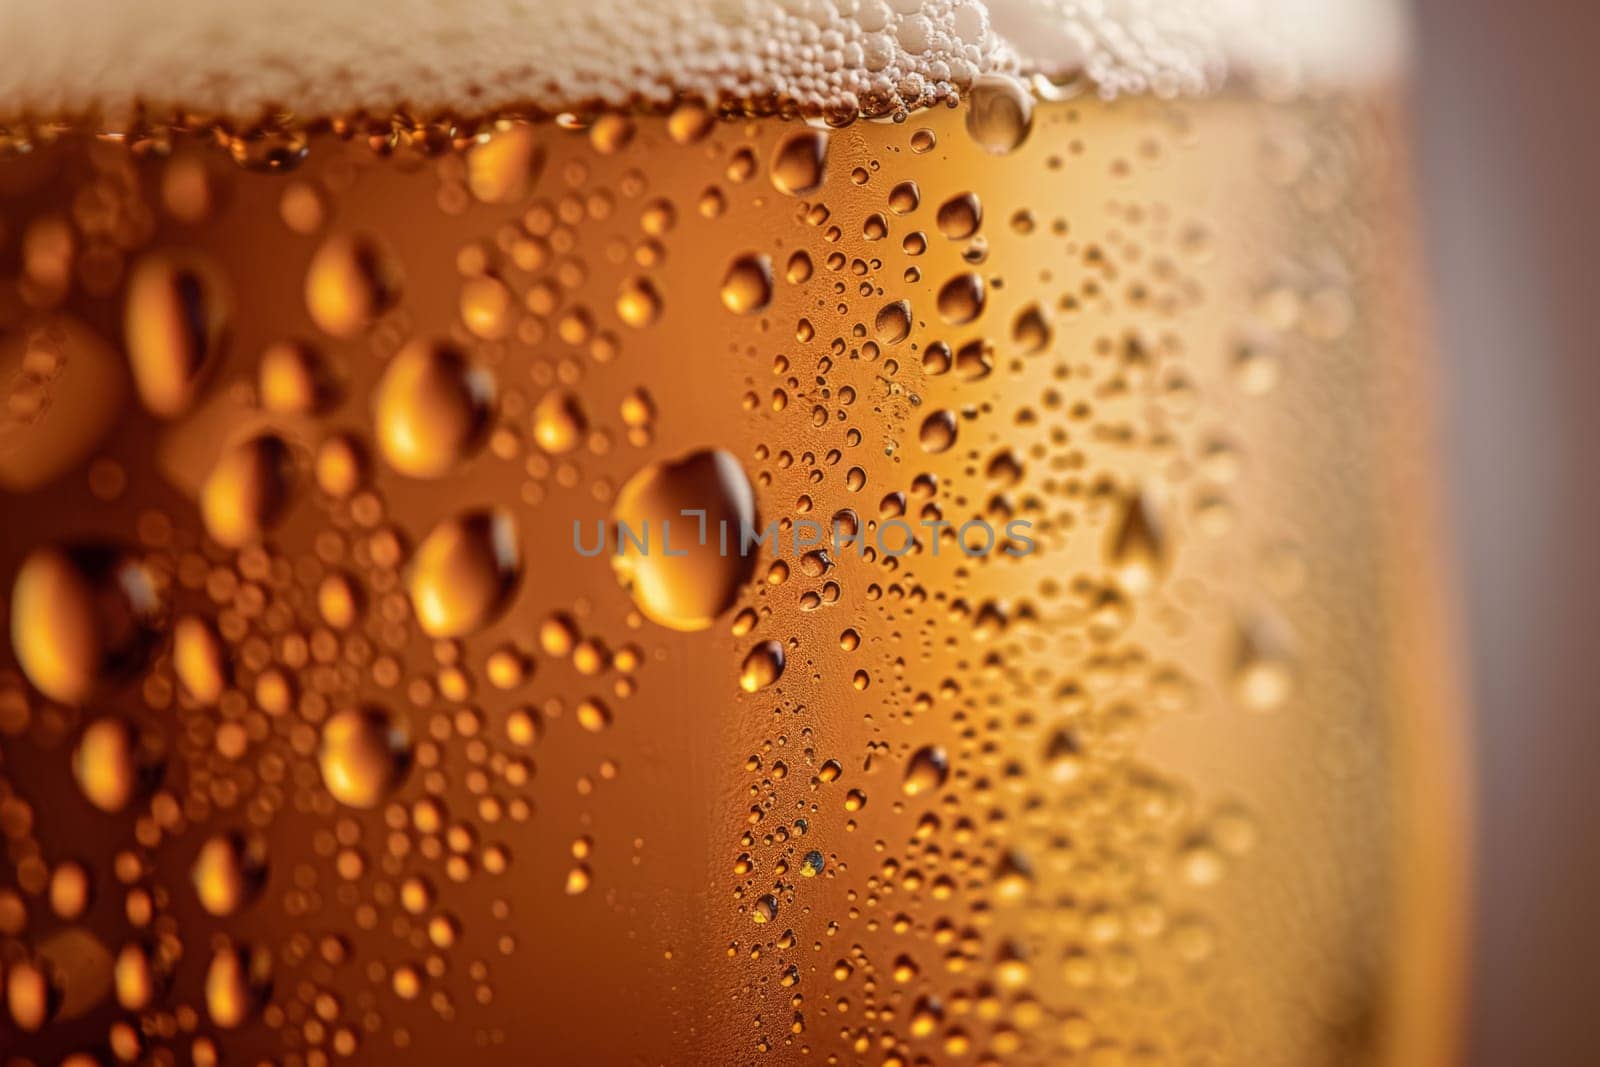 Chilled Craft Beer with Condensation by andreyz